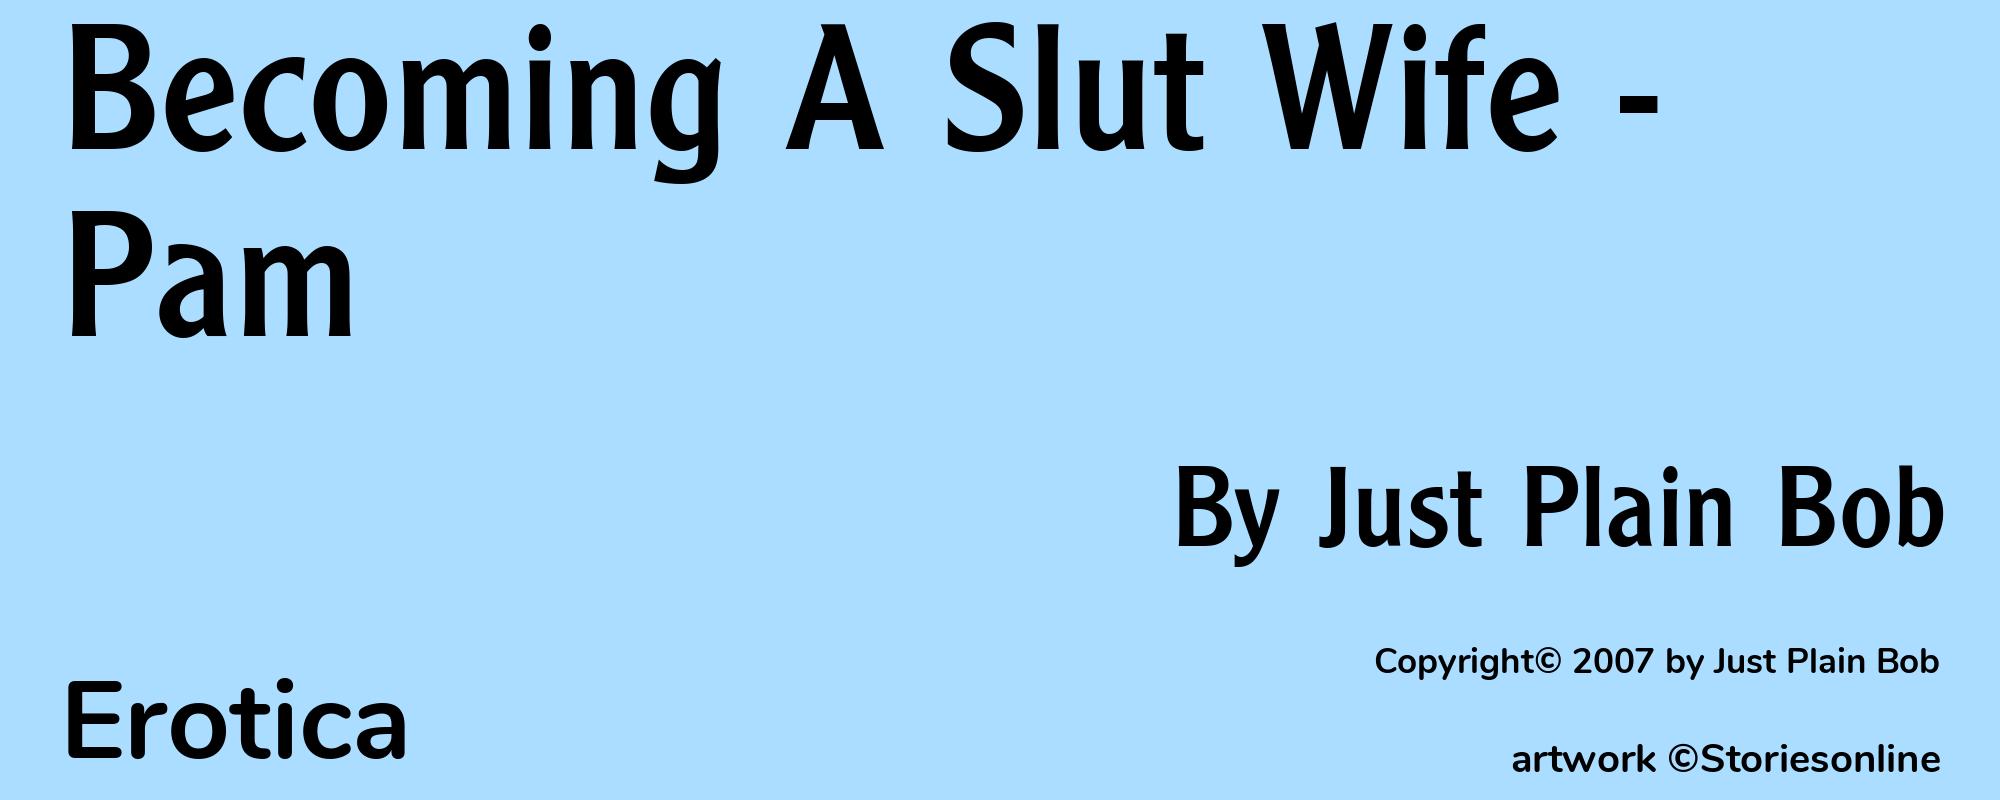 Becoming A Slut Wife - Pam - Cover